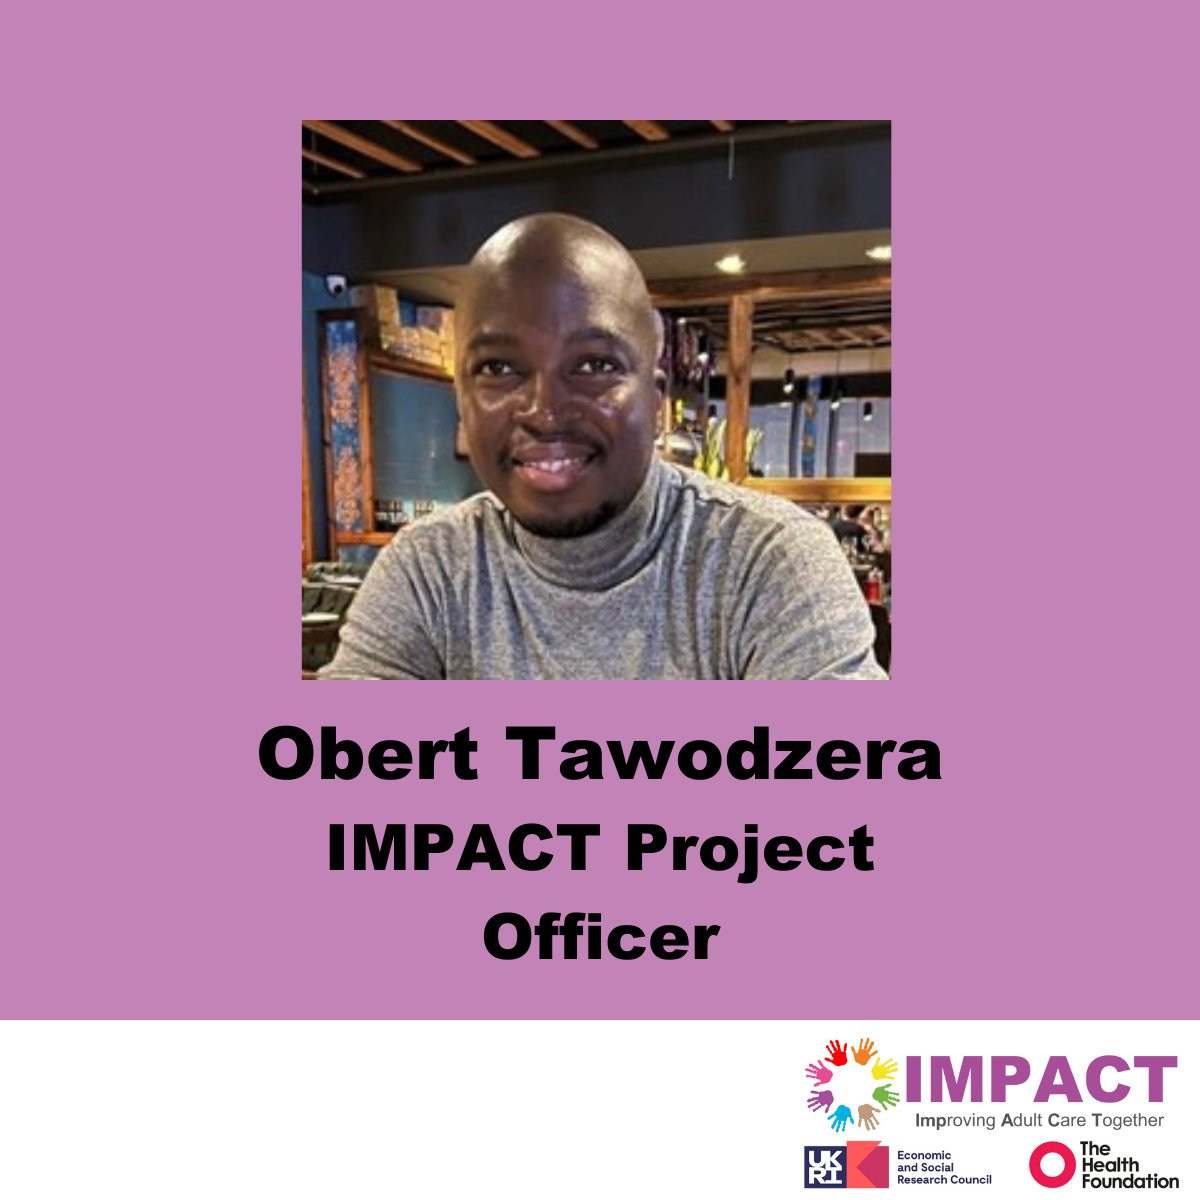 Meet the team! Introducing Dr Obert Tawodzera, our Project Officer. He has a Master of Research in Social Policy and recently completed his PhD at the University of Sheffield! Learn more and meet the rest of our team: ow.ly/30lm50Lbzs6